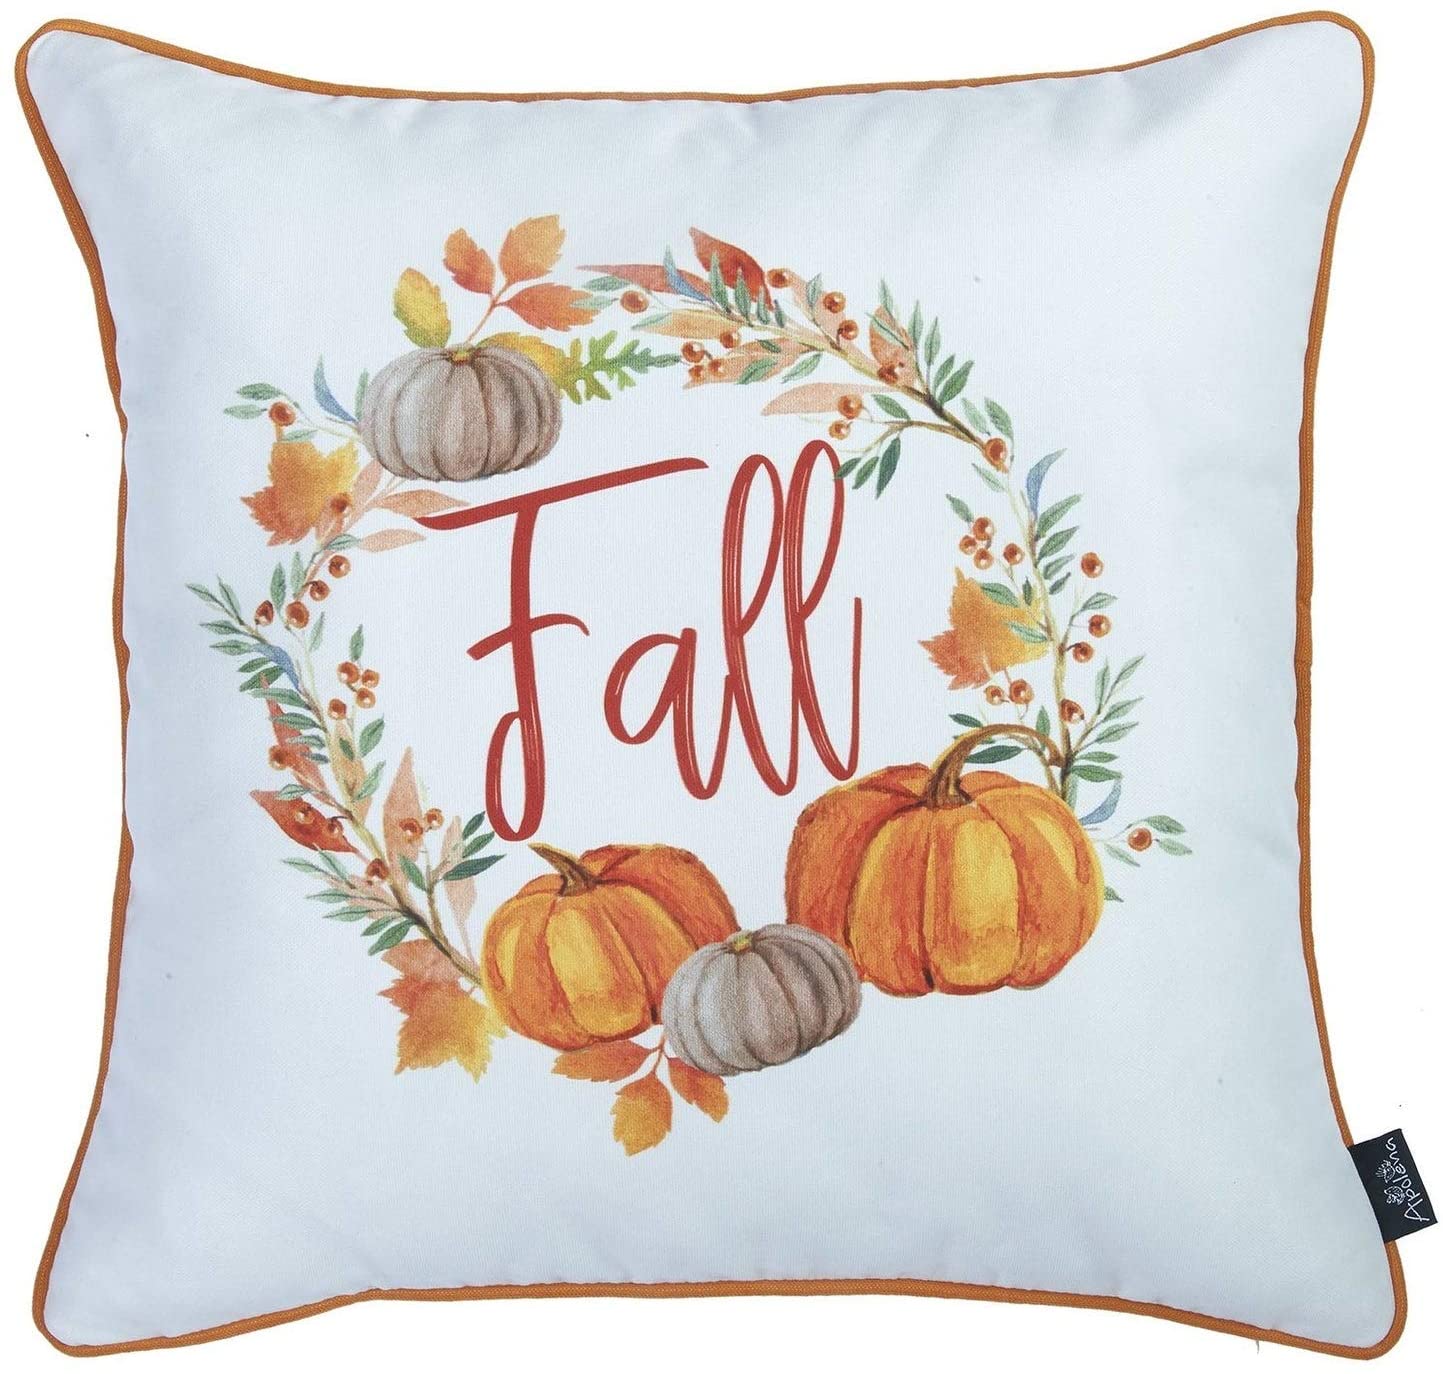 Unknown1 Fall Thanksgiving Pumpkin Throw Pillow Cover 18'x18' (Set 4) Color Floral Farmhouse Polyester Set 3 More Removable